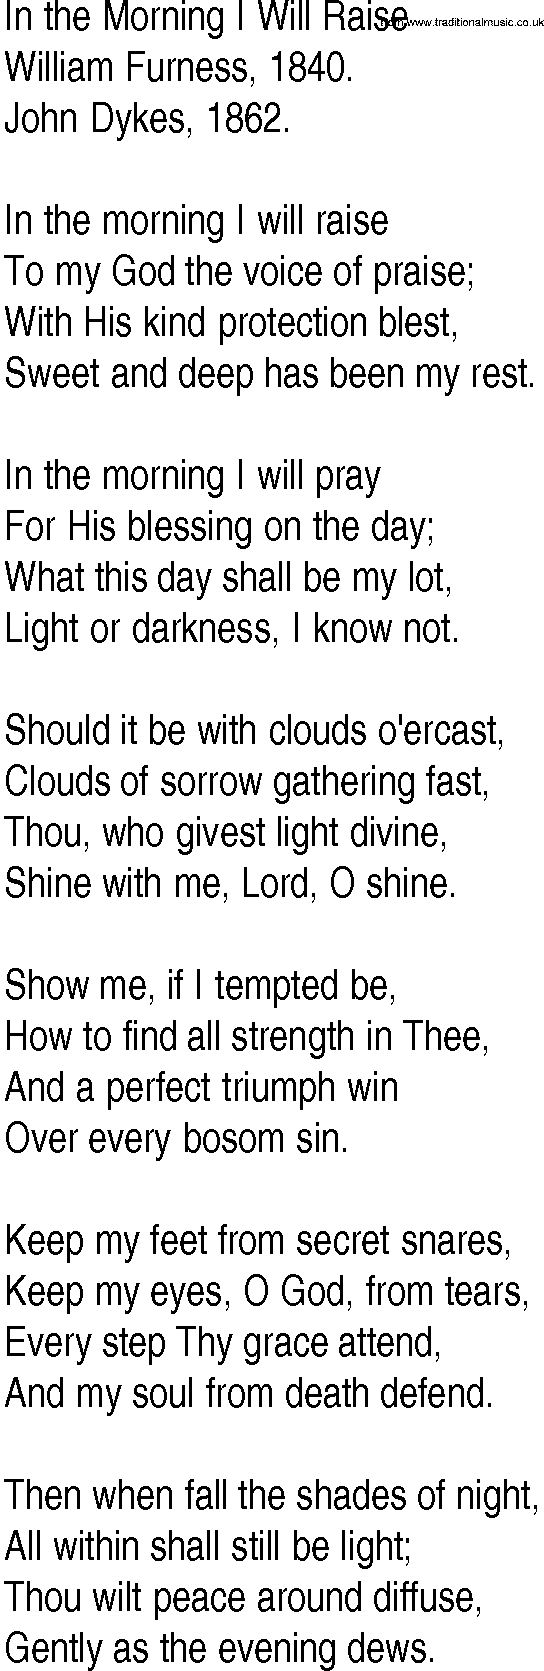 Hymn and Gospel Song: In the Morning I Will Raise by William Furness lyrics